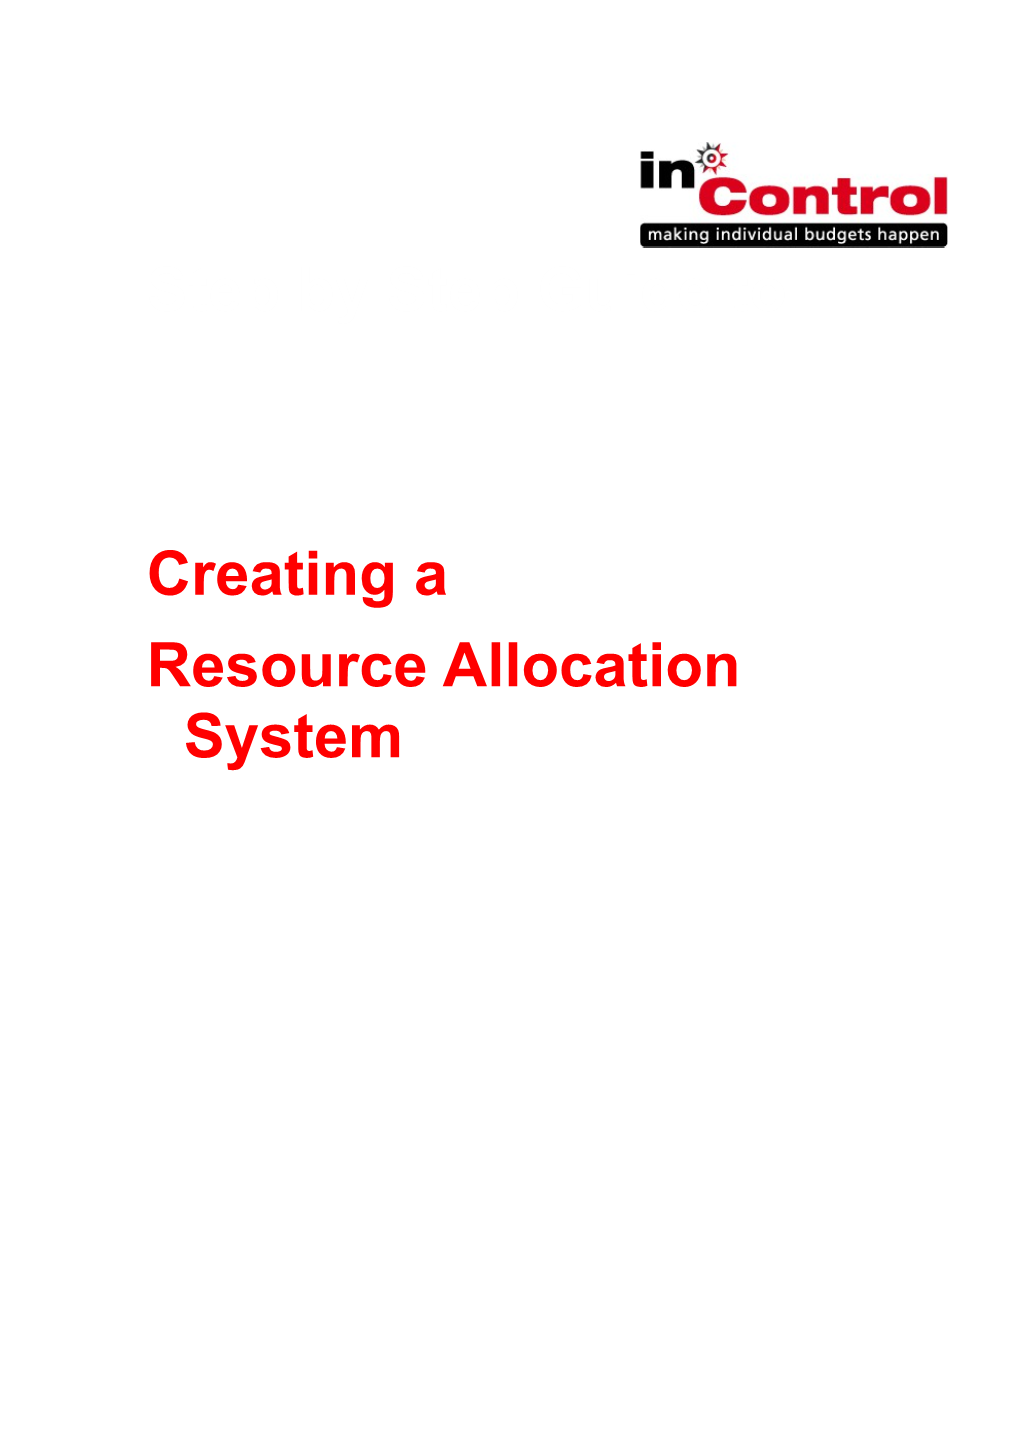 A Guide to Creating a Resource Allocation System